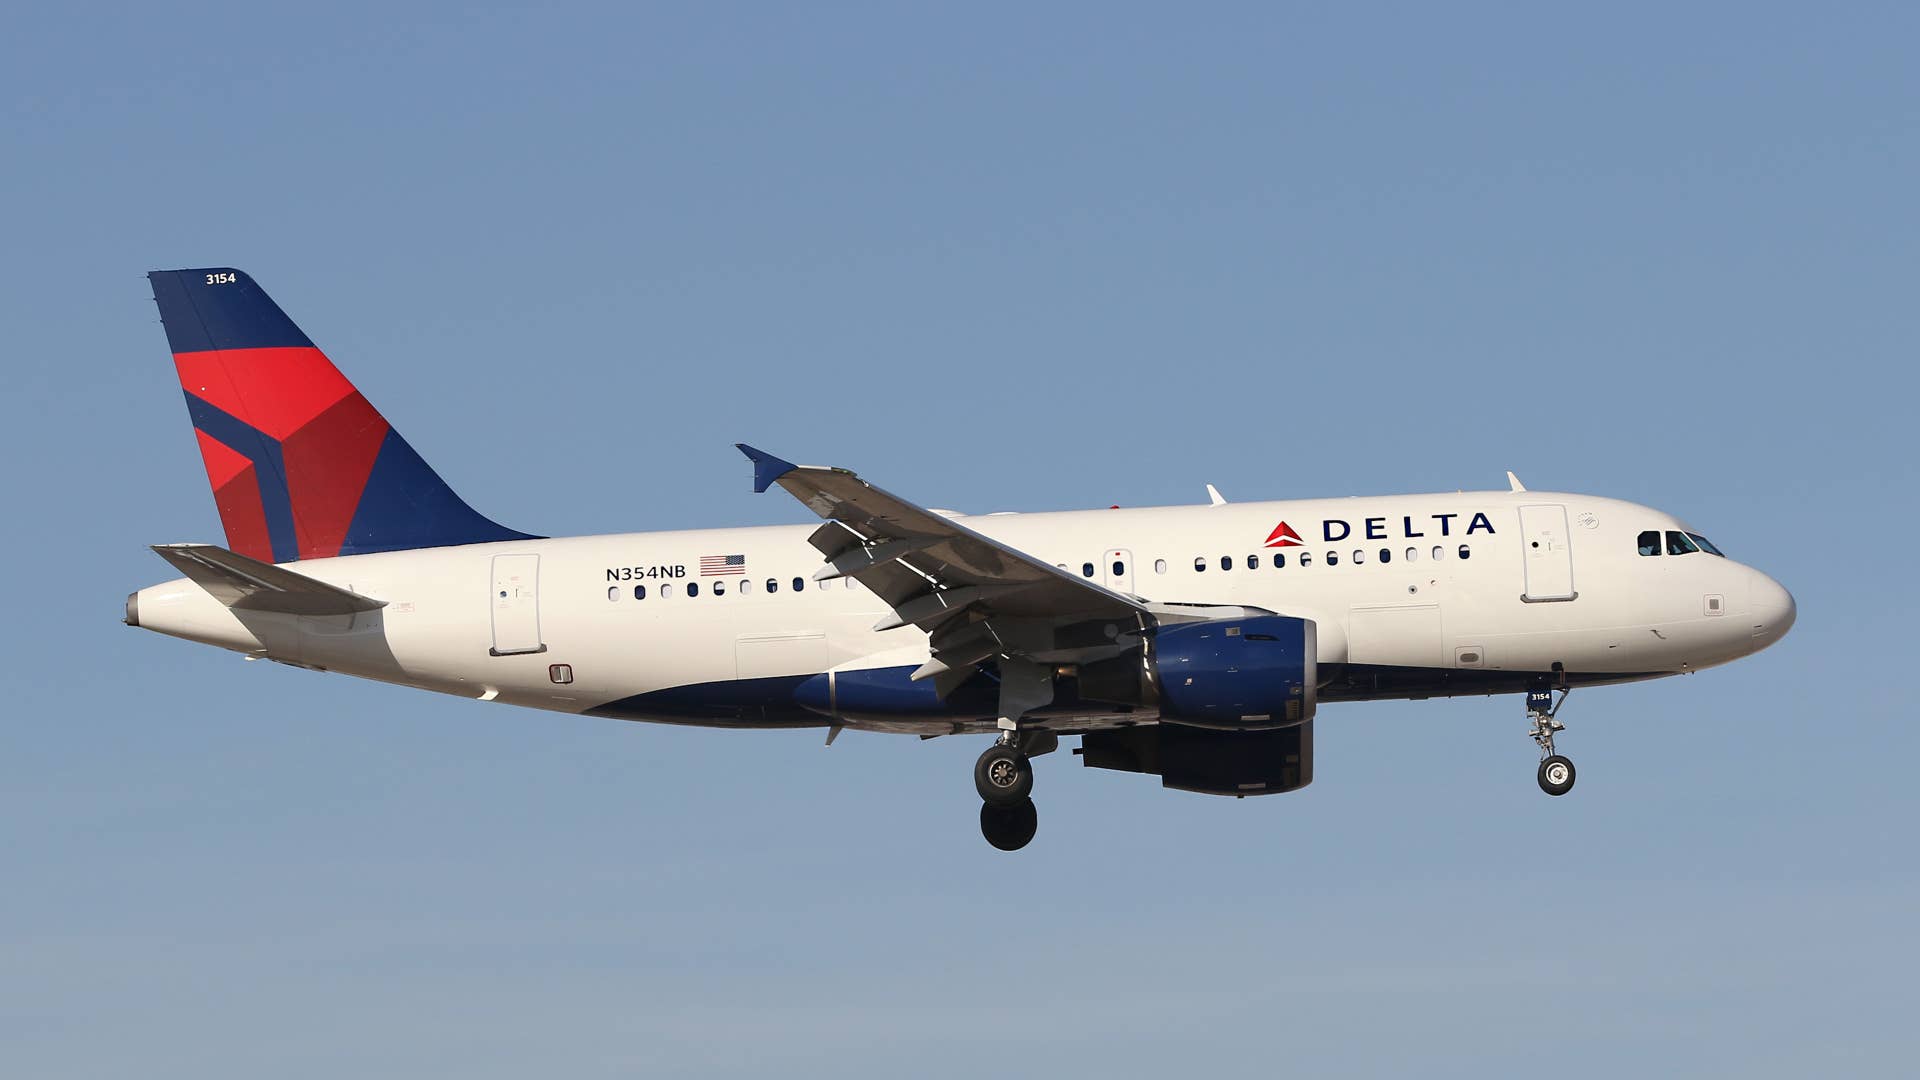 Delta Air Lines plane is pictured in flight